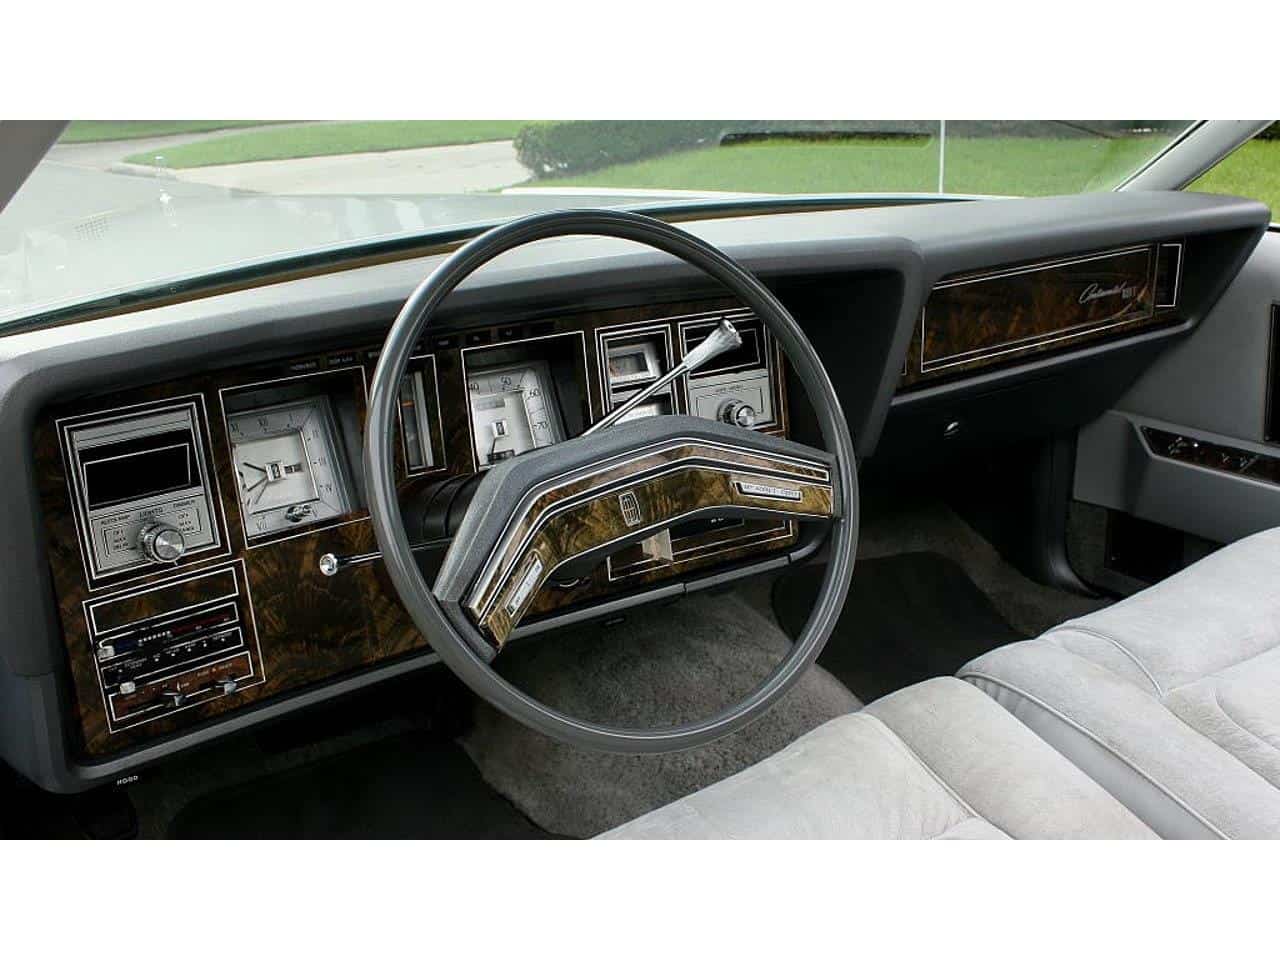 Lincoln Mark 5, Featured Listing: I have arrived! the 1979 Lincoln Mark 5, ClassicCars.com Journal